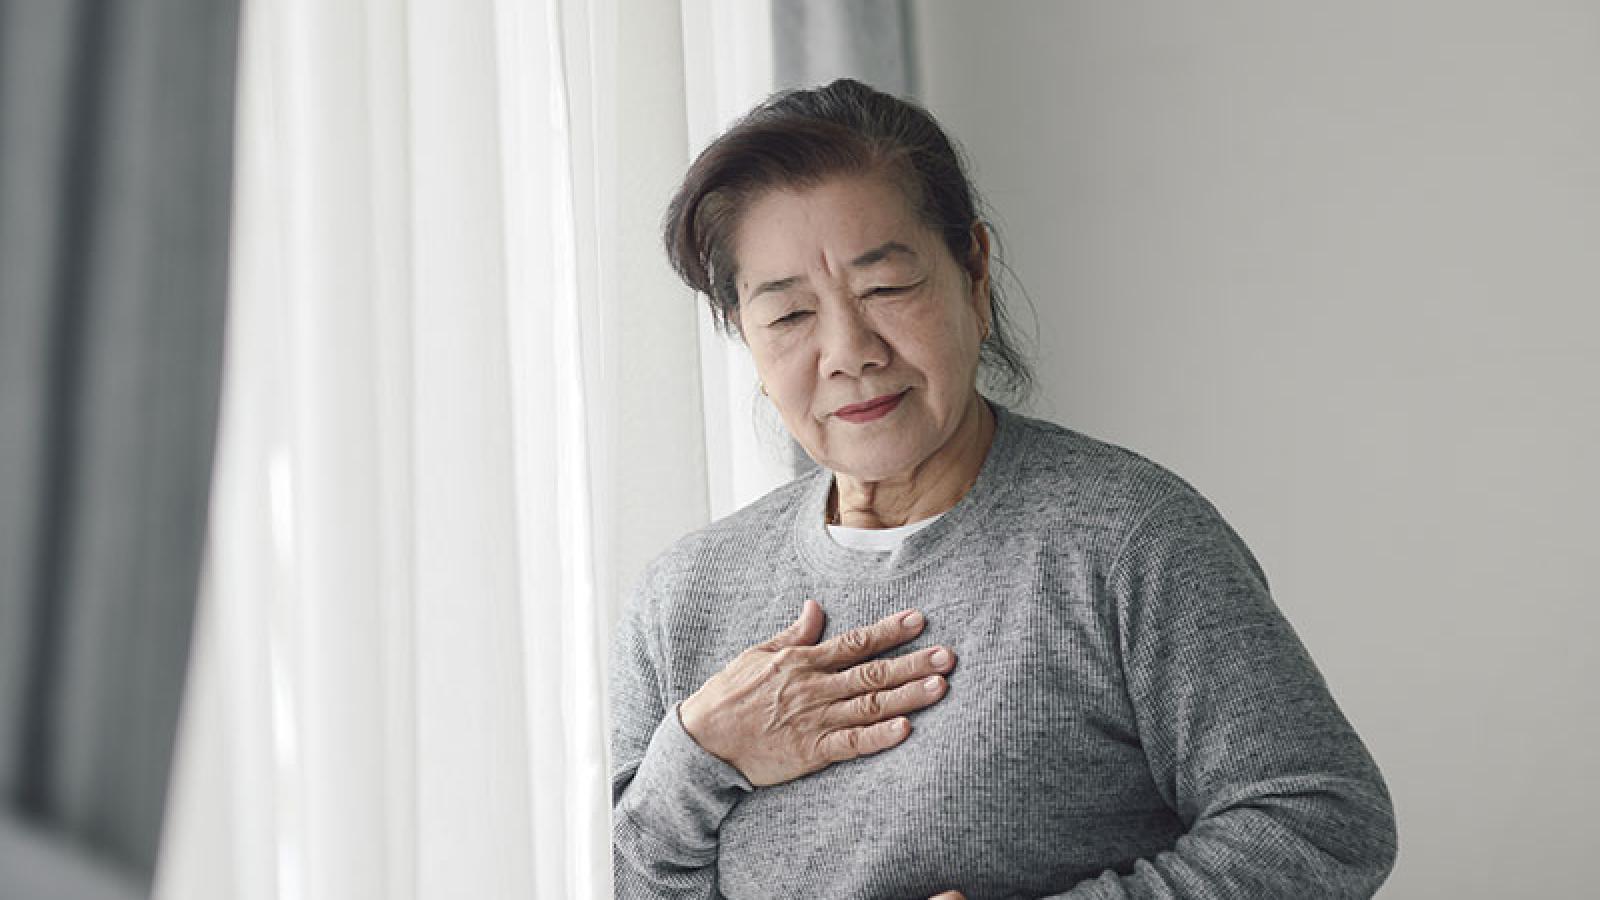 Don’t Miss These Early Warning Signs of Heart Failure